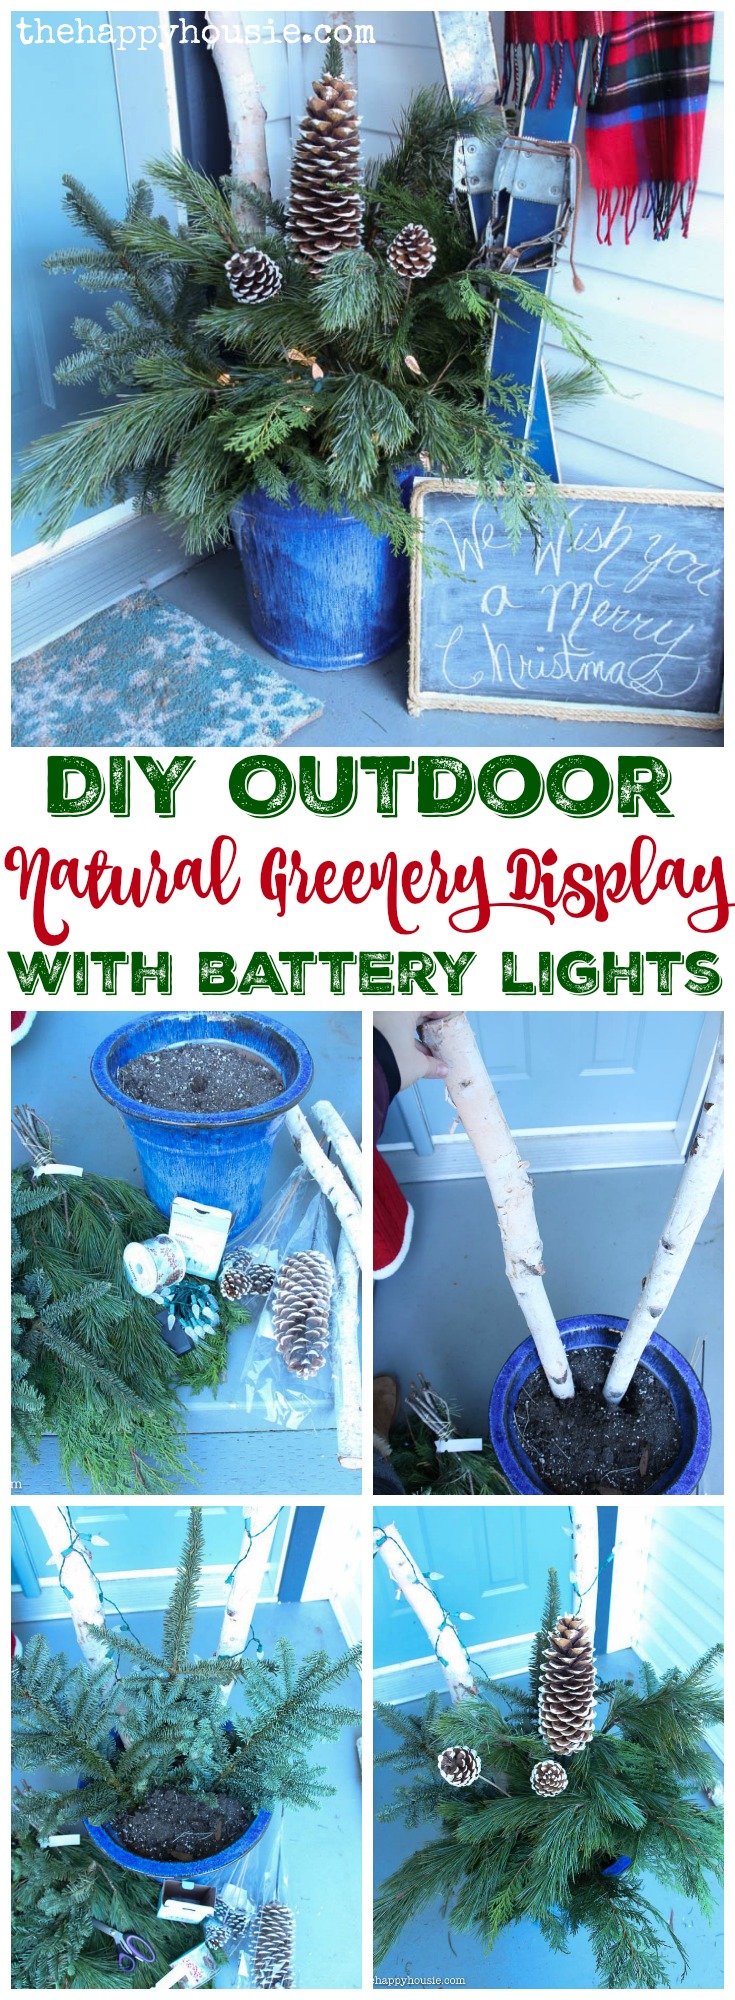 Easy DIY Outdoor Natural Greenery Display with Battery Operated Lights tutorial poster.